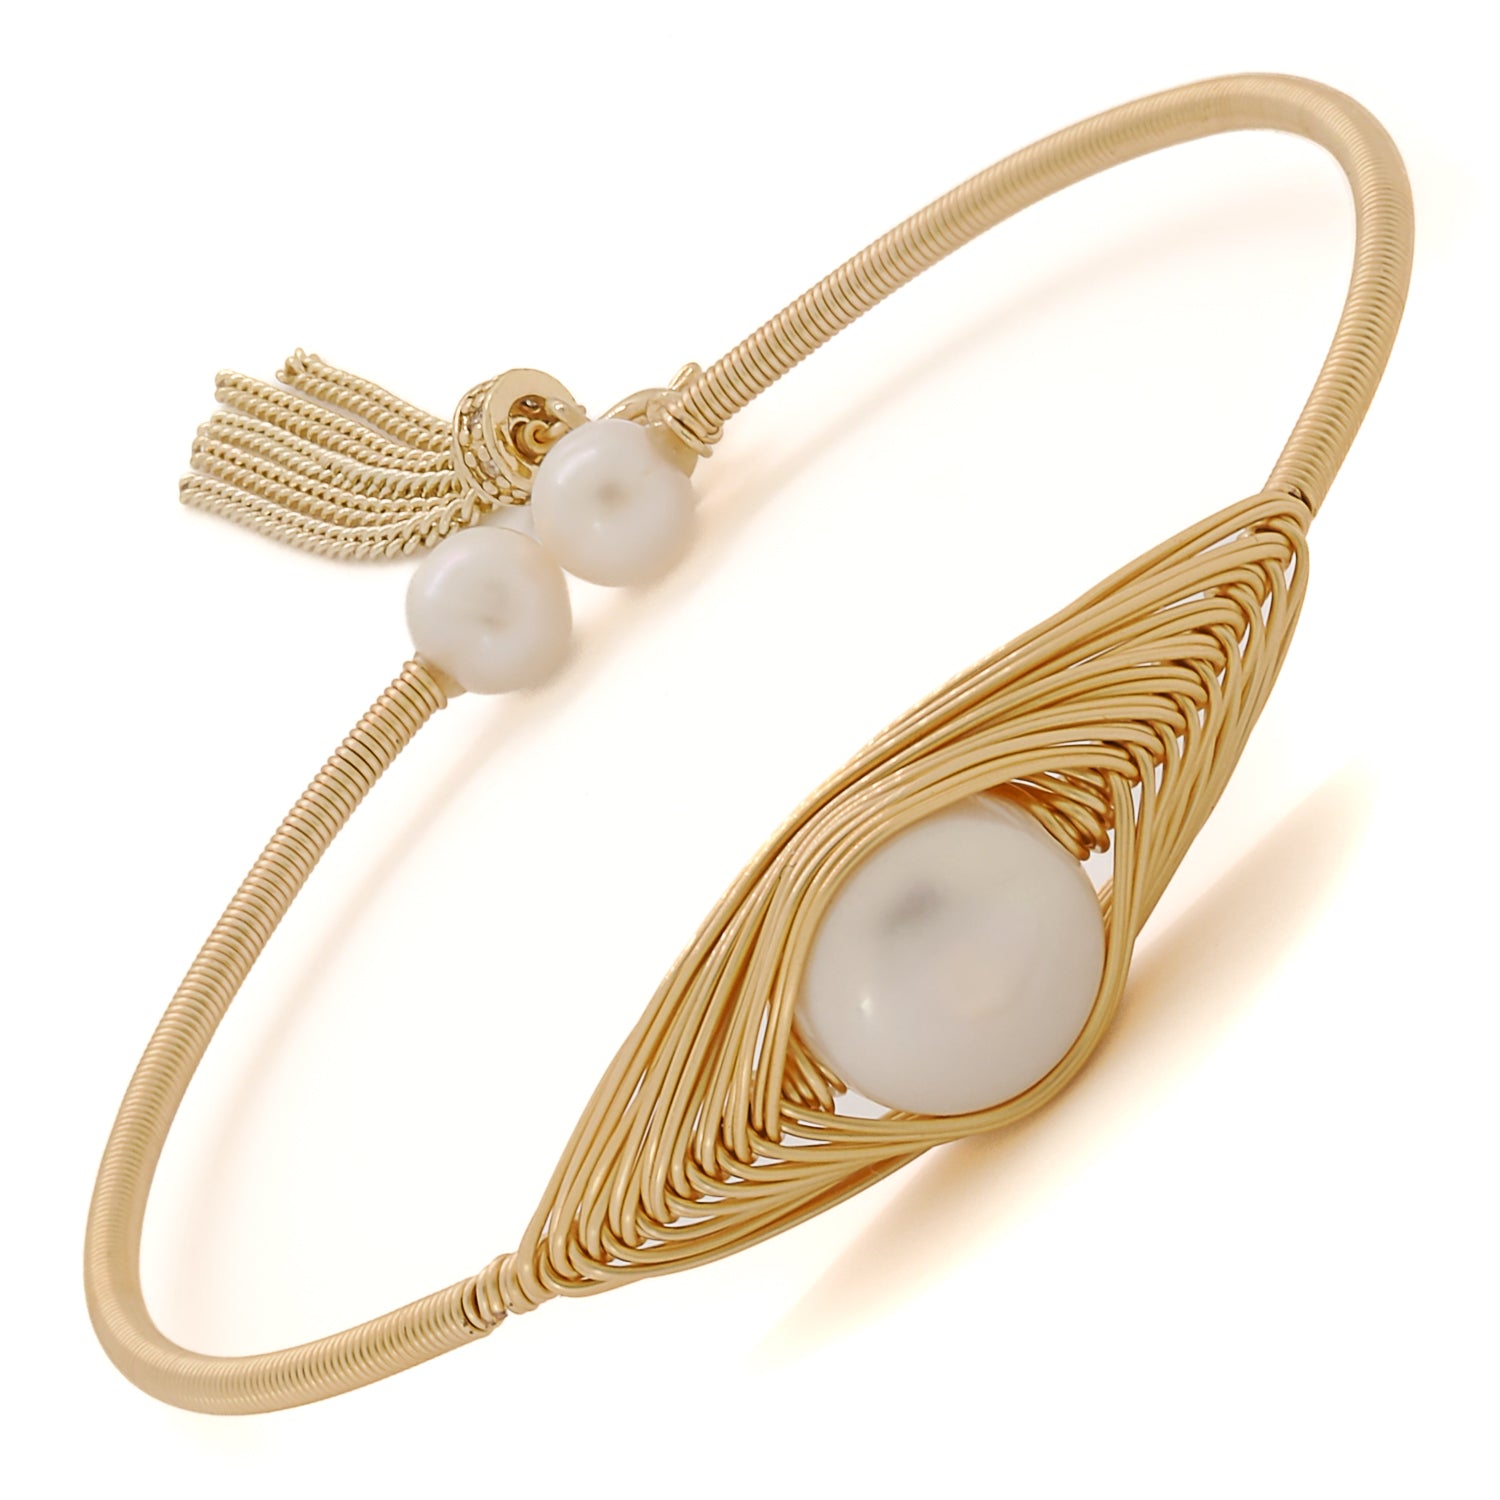 Lustrous pearls meet radiant gold in the Cleopatra Pearl Bangle Bracelet.